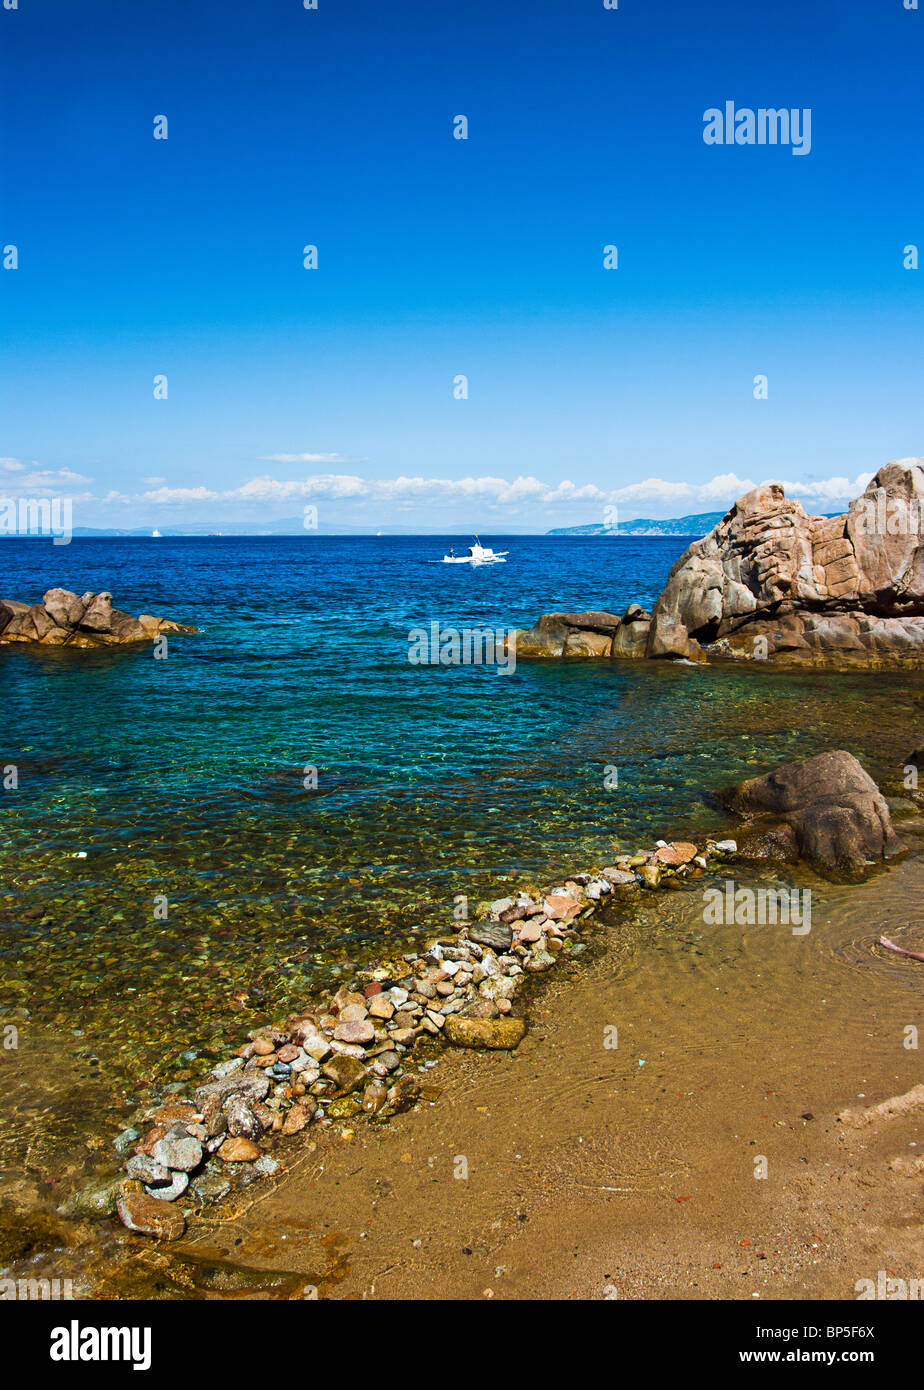 Bay of saracen  isle Giglio   tuscan arcipelago resumed in the afternoon hours in longitudinal. Isola del Giglio Cala saracino Stock Photo